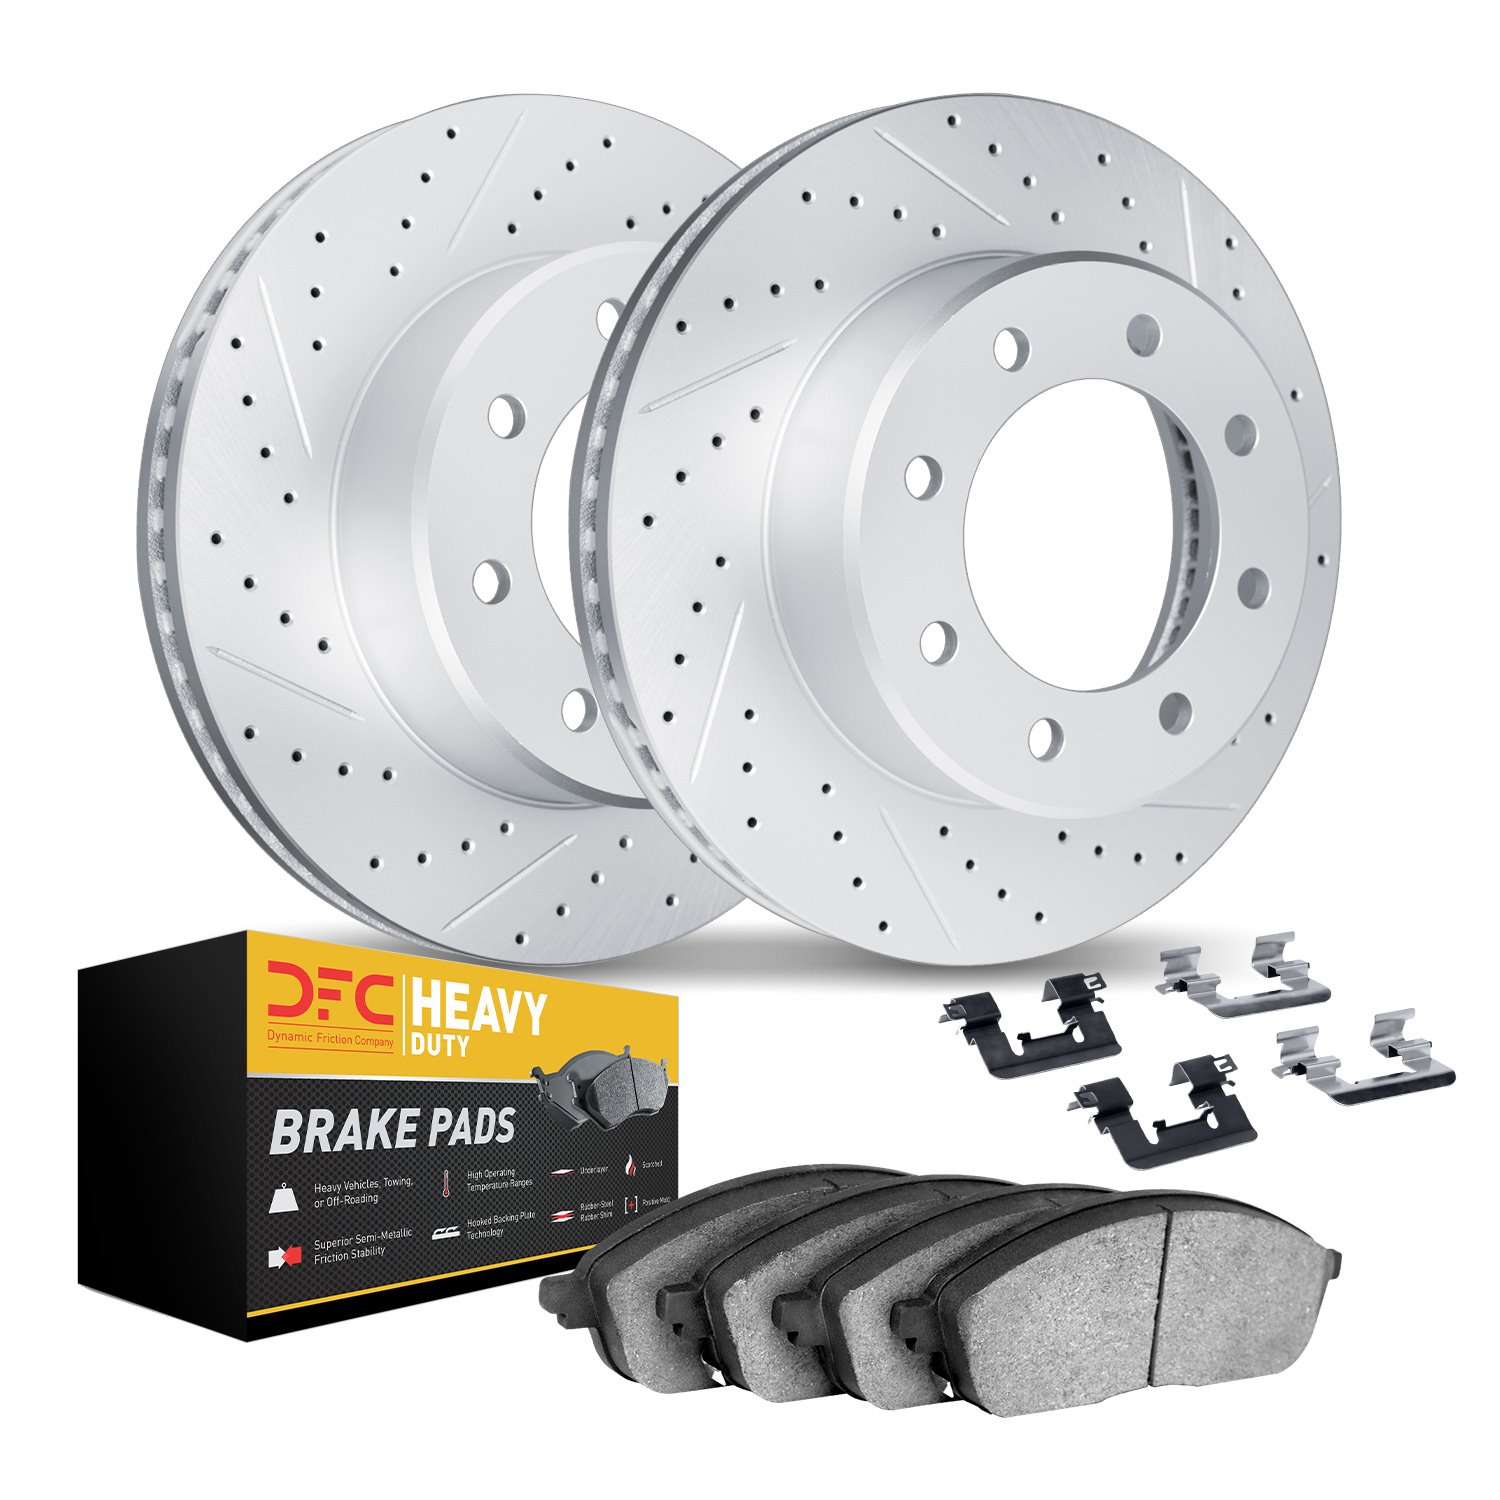 2212-99083 Geoperformance Drilled/Slotted Rotors w/Heavy-Duty Pads Kit & Hardware, 1995-2007 Ford/Lincoln/Mercury/Mazda, Positio